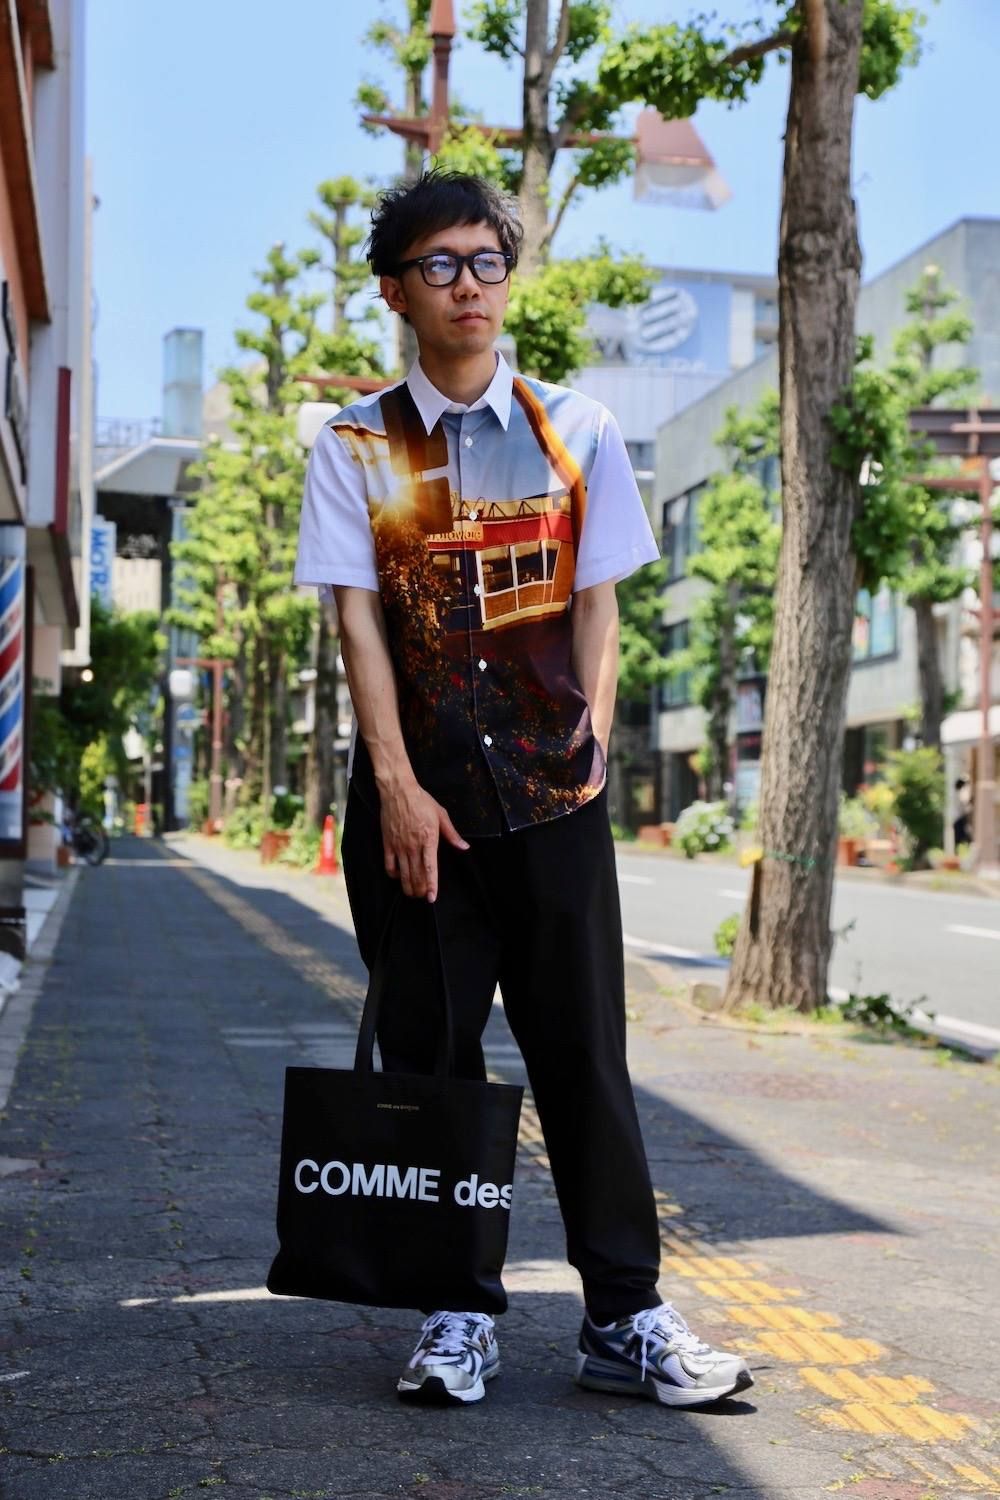 COMME des GARCONS HOMME 綿ブロード製品プリントシャツStyle.2020.6.8